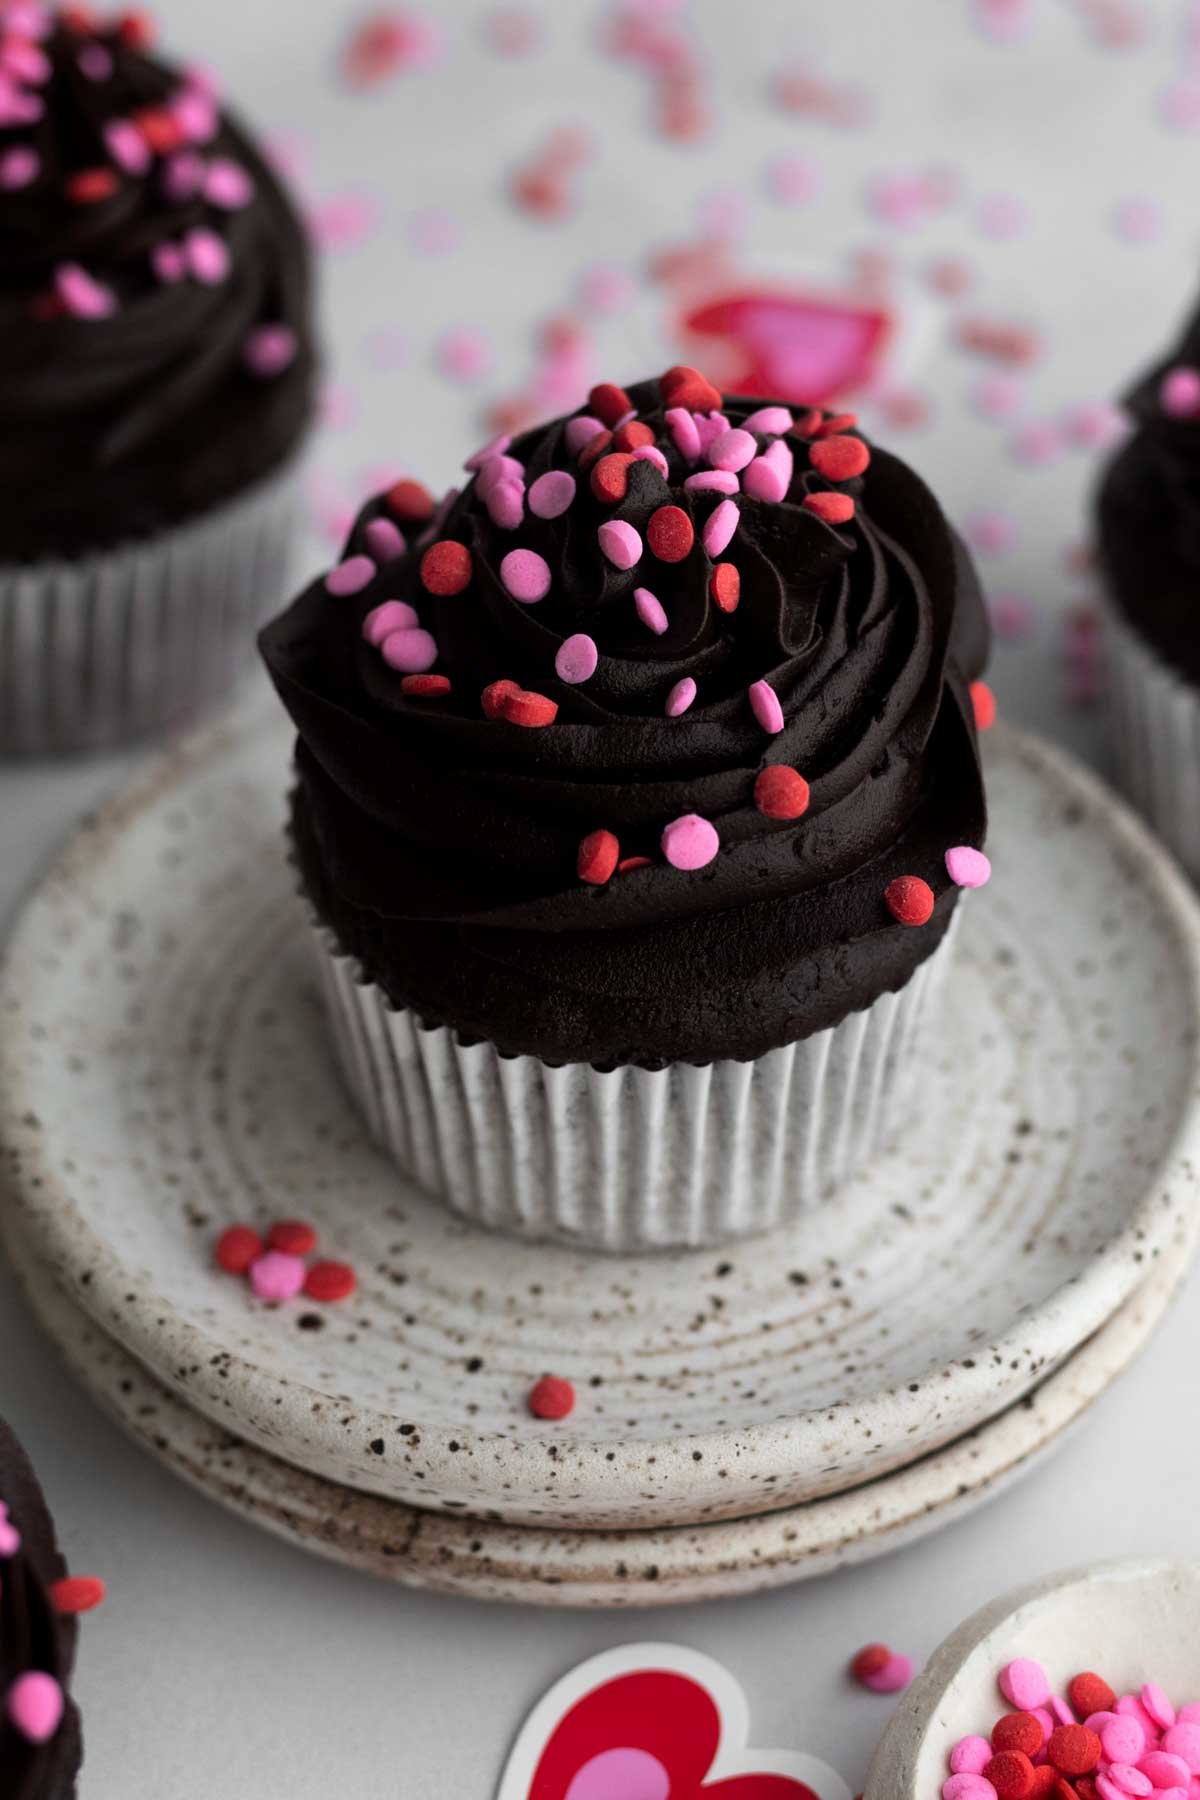 A delicious Small Batch Chocolate Cupcake with pink and red round sprinkles.